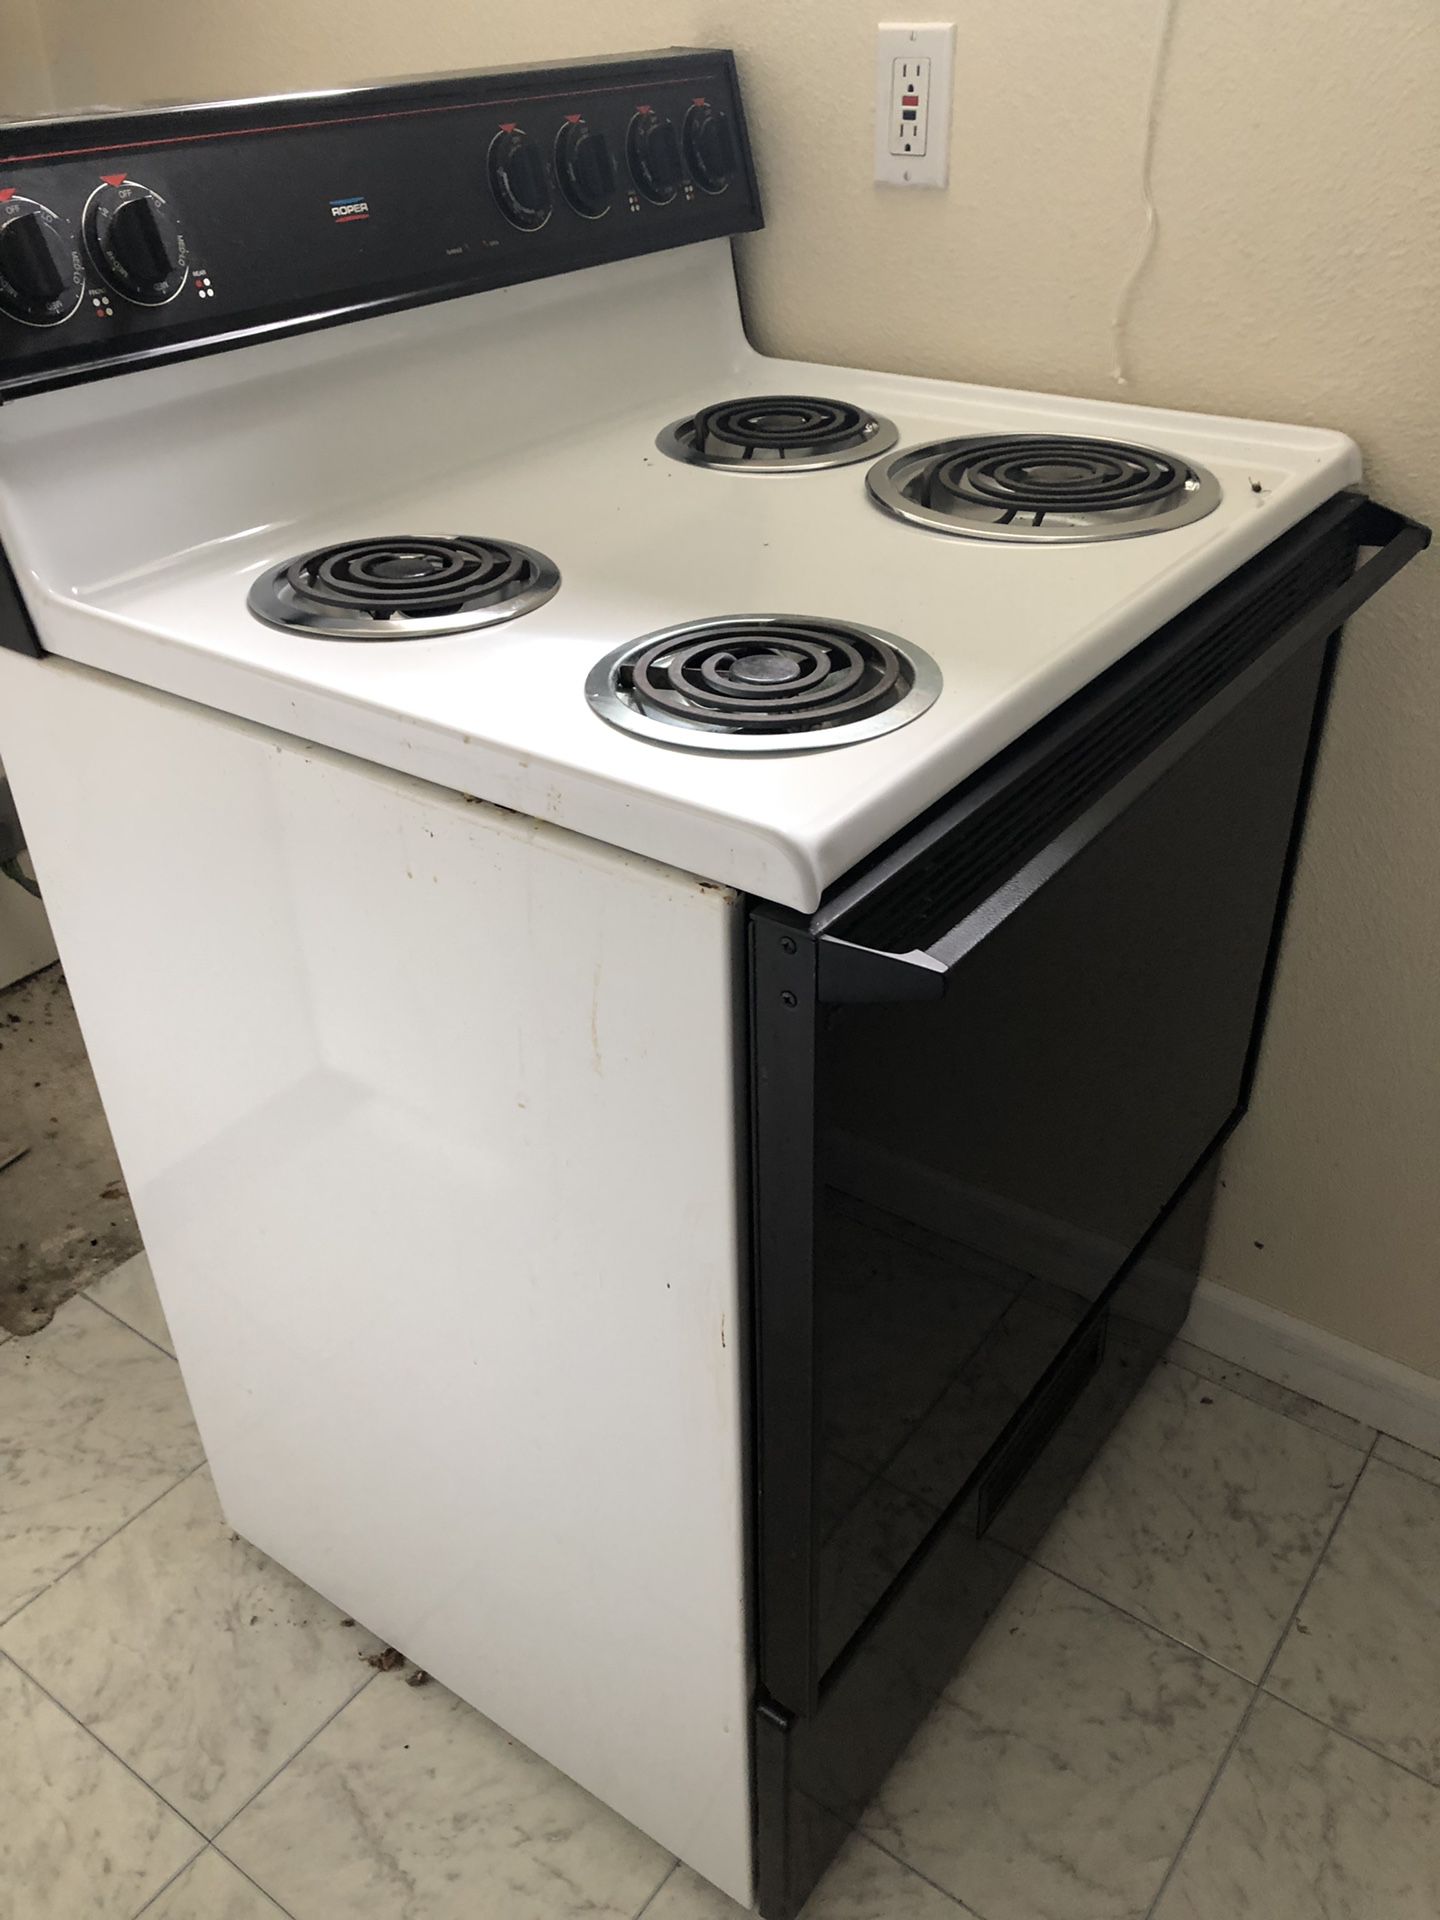 Free kitchen - must take all pieces